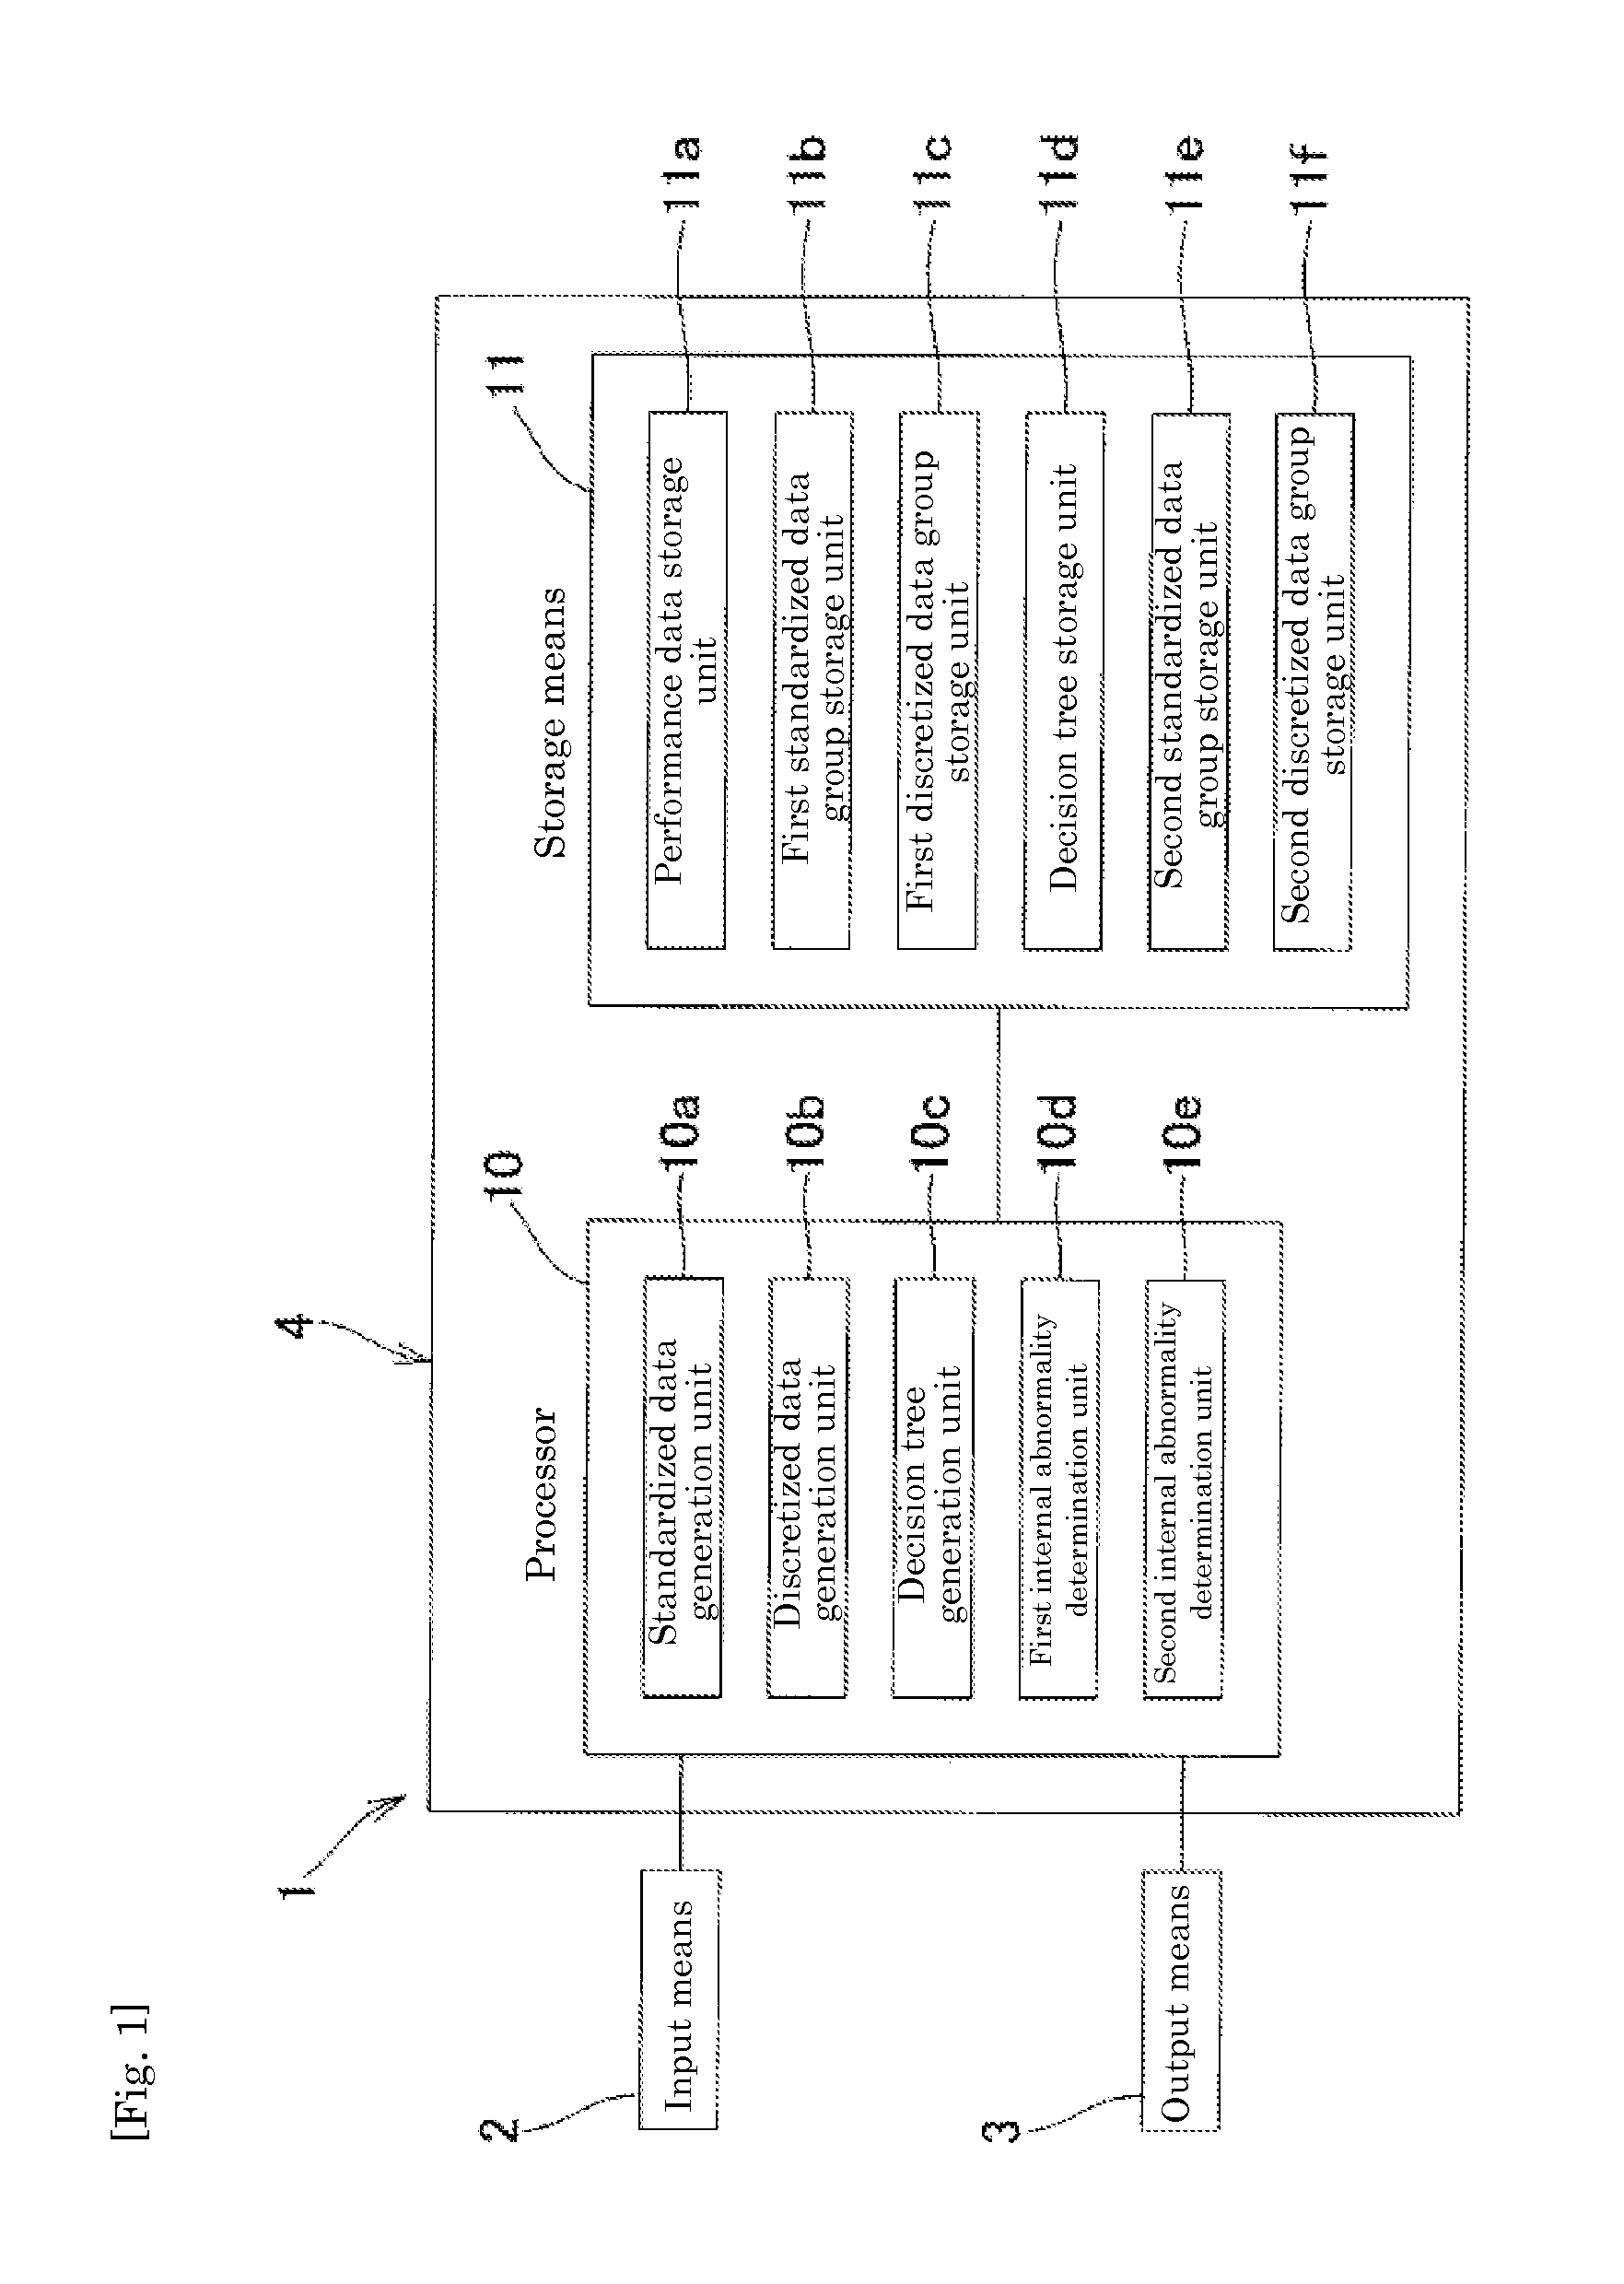 Internal abnormality diagnosis method, internal abnormality diagnosis system, and decision tree generation method for internal abnormality diagnosis of oil-filled electric apparatus utilizing gas concentration in oil